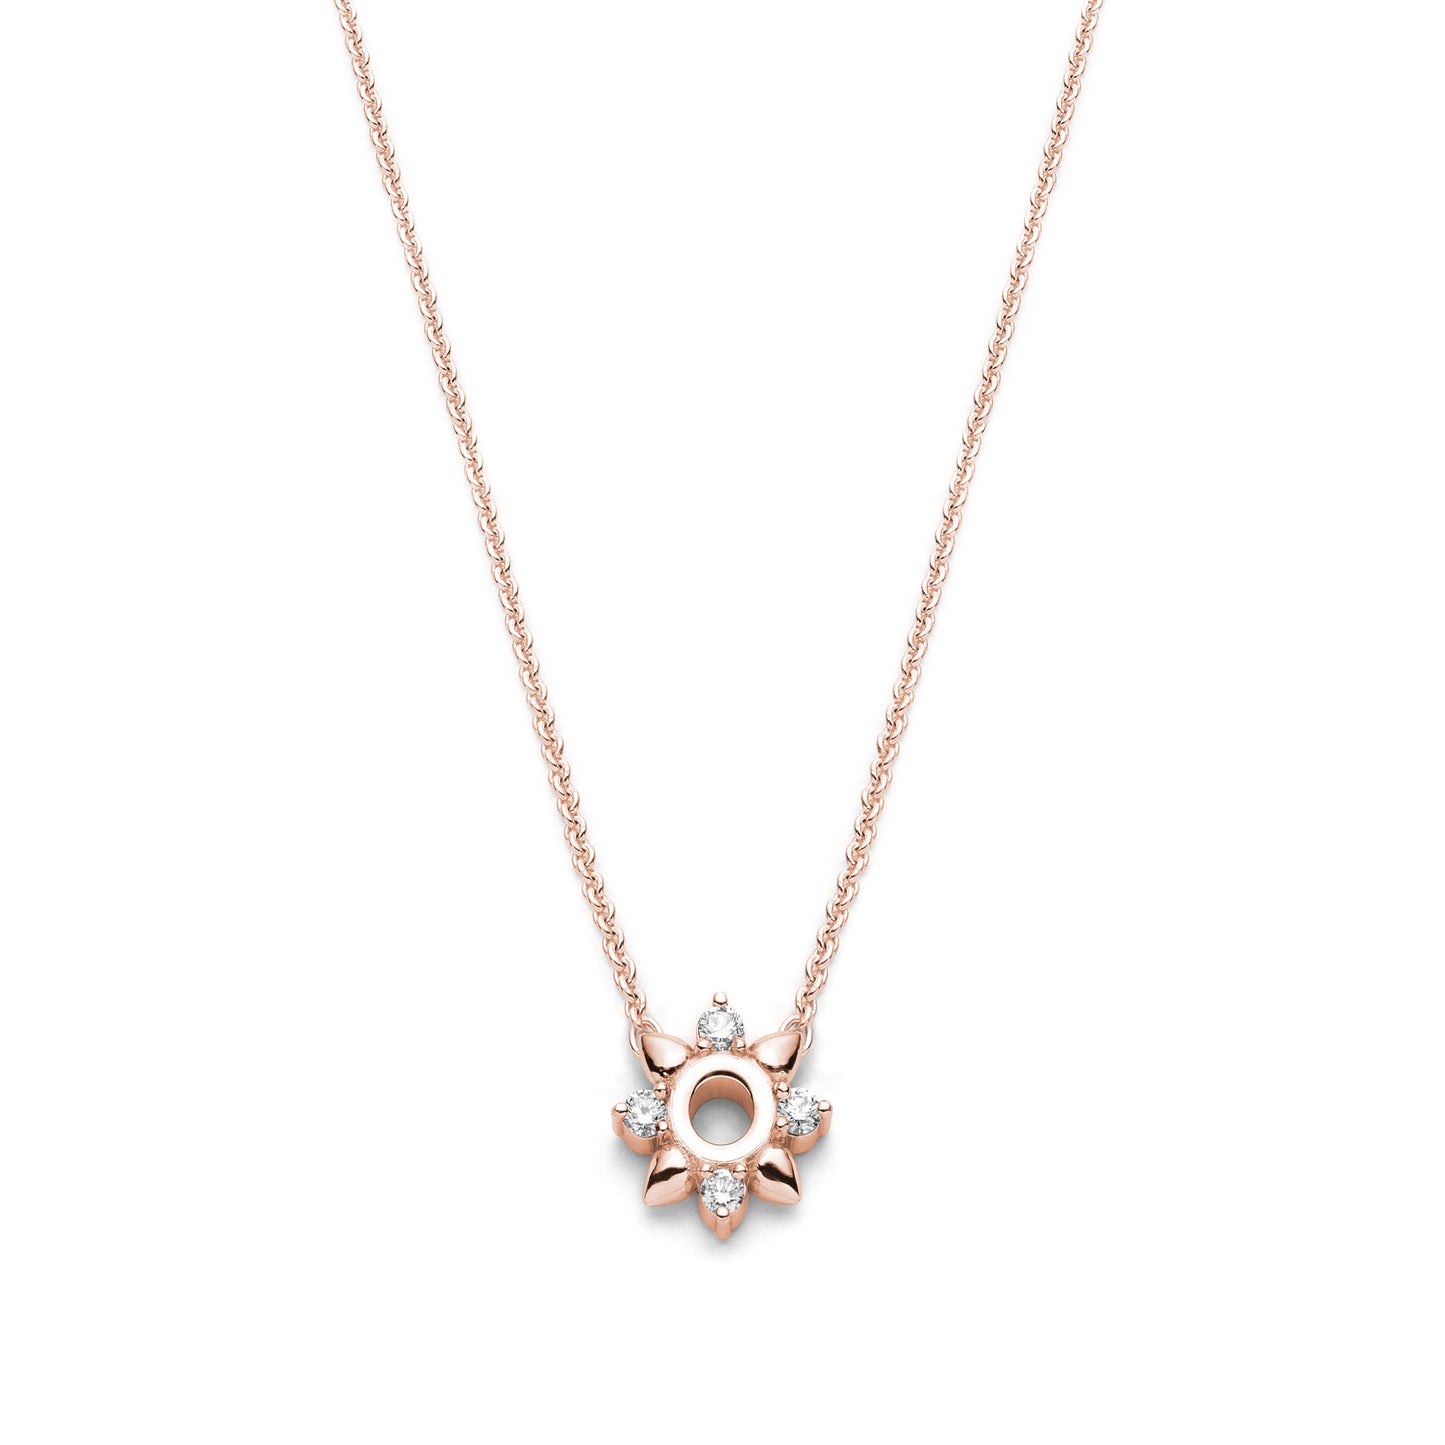 Delicate spiked flower diamond necklace